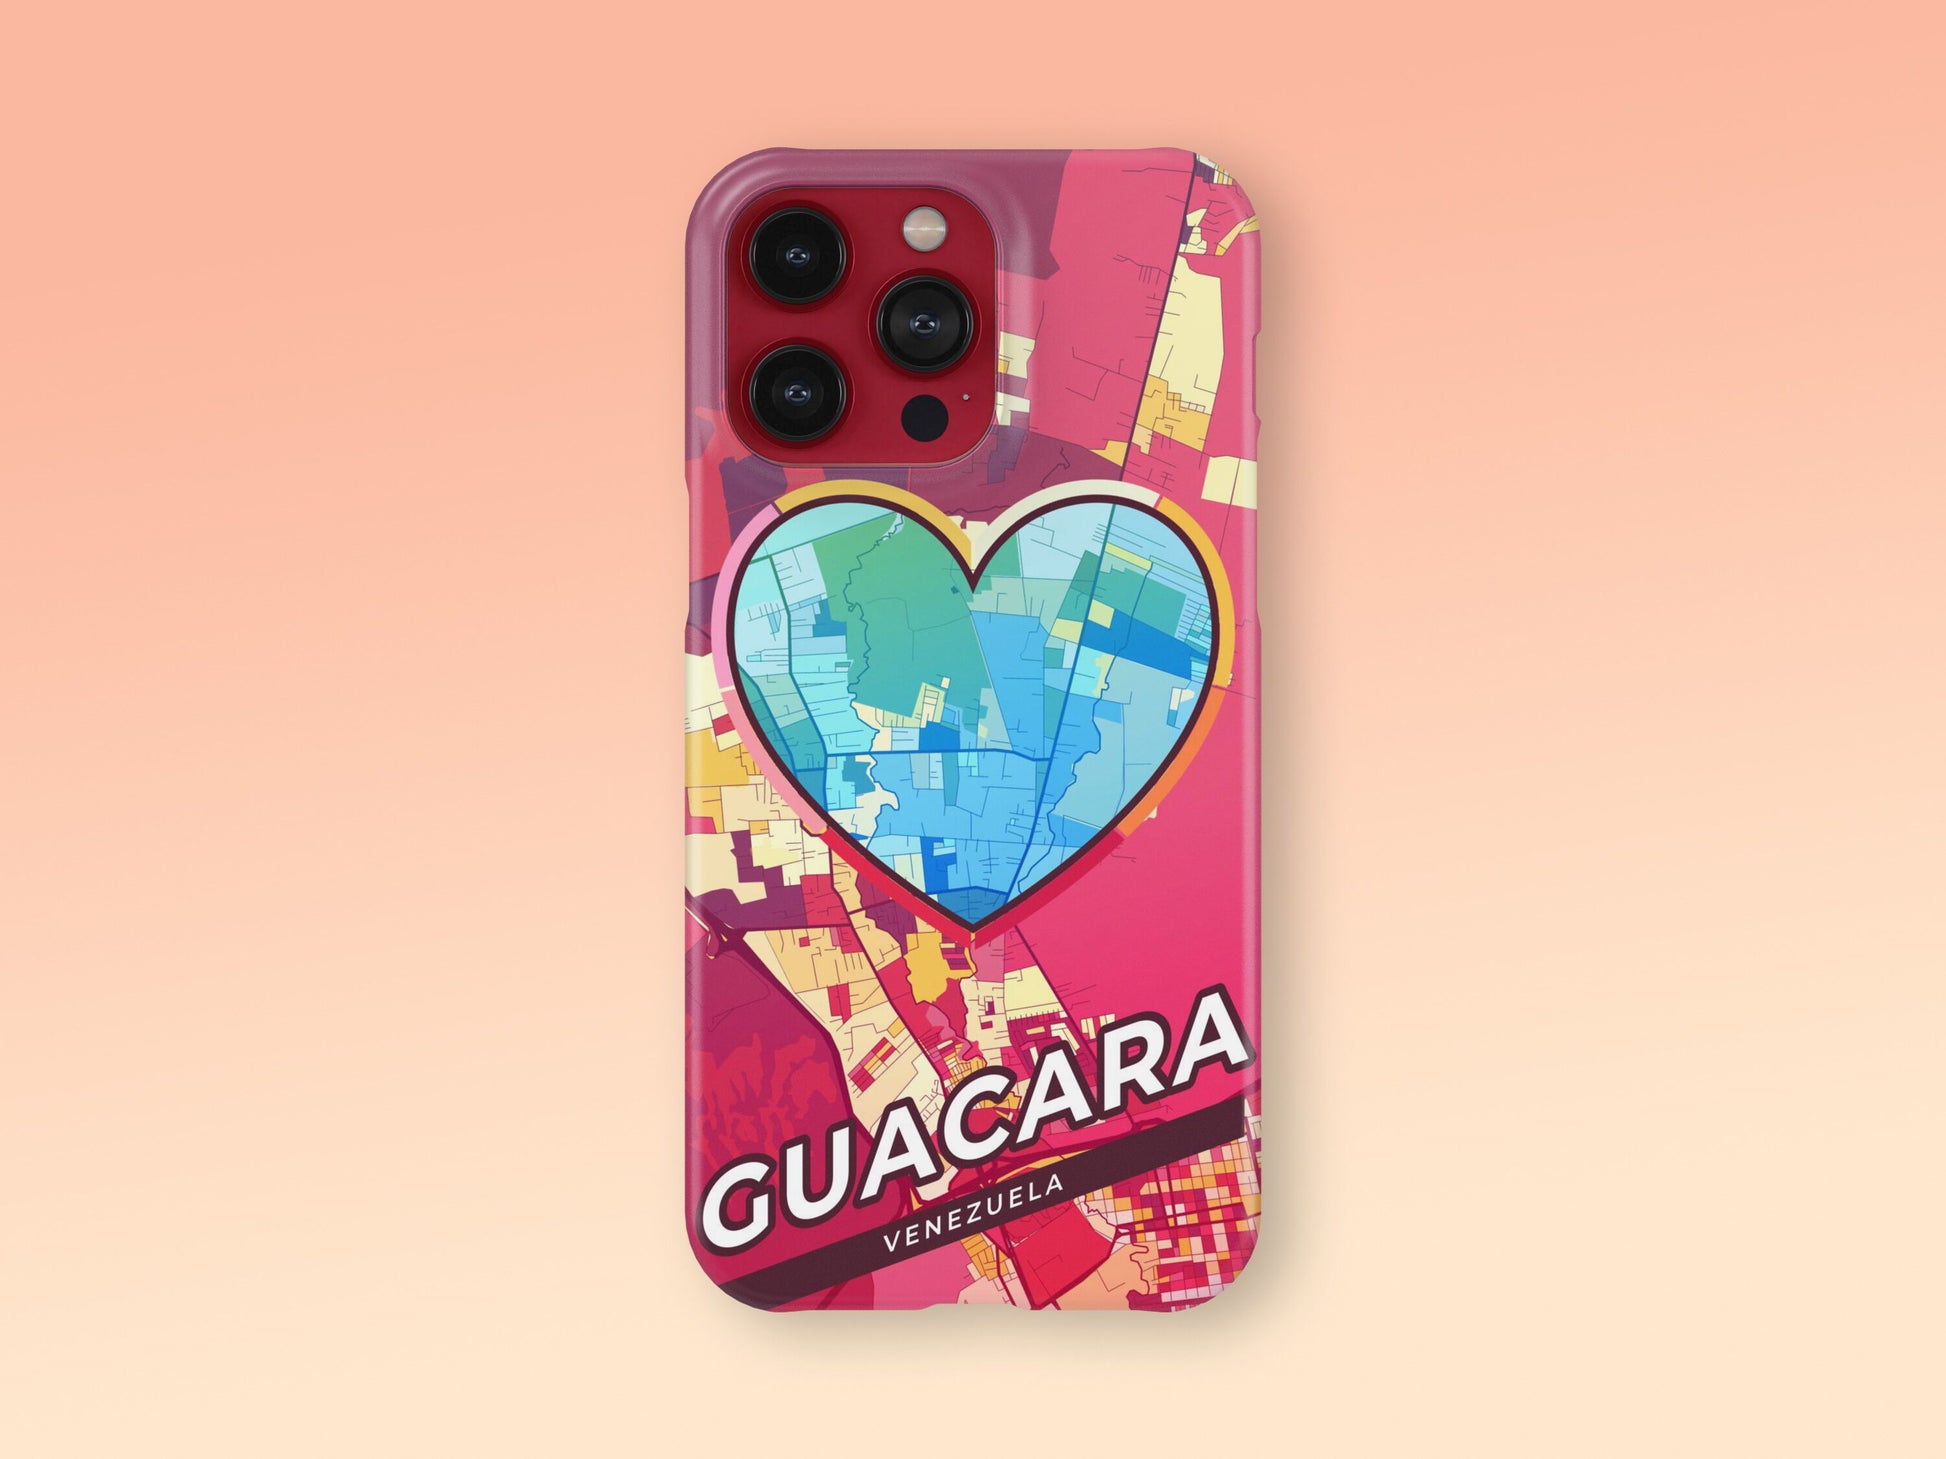 Guacara Venezuela slim phone case with colorful icon. Birthday, wedding or housewarming gift. Couple match cases. 2